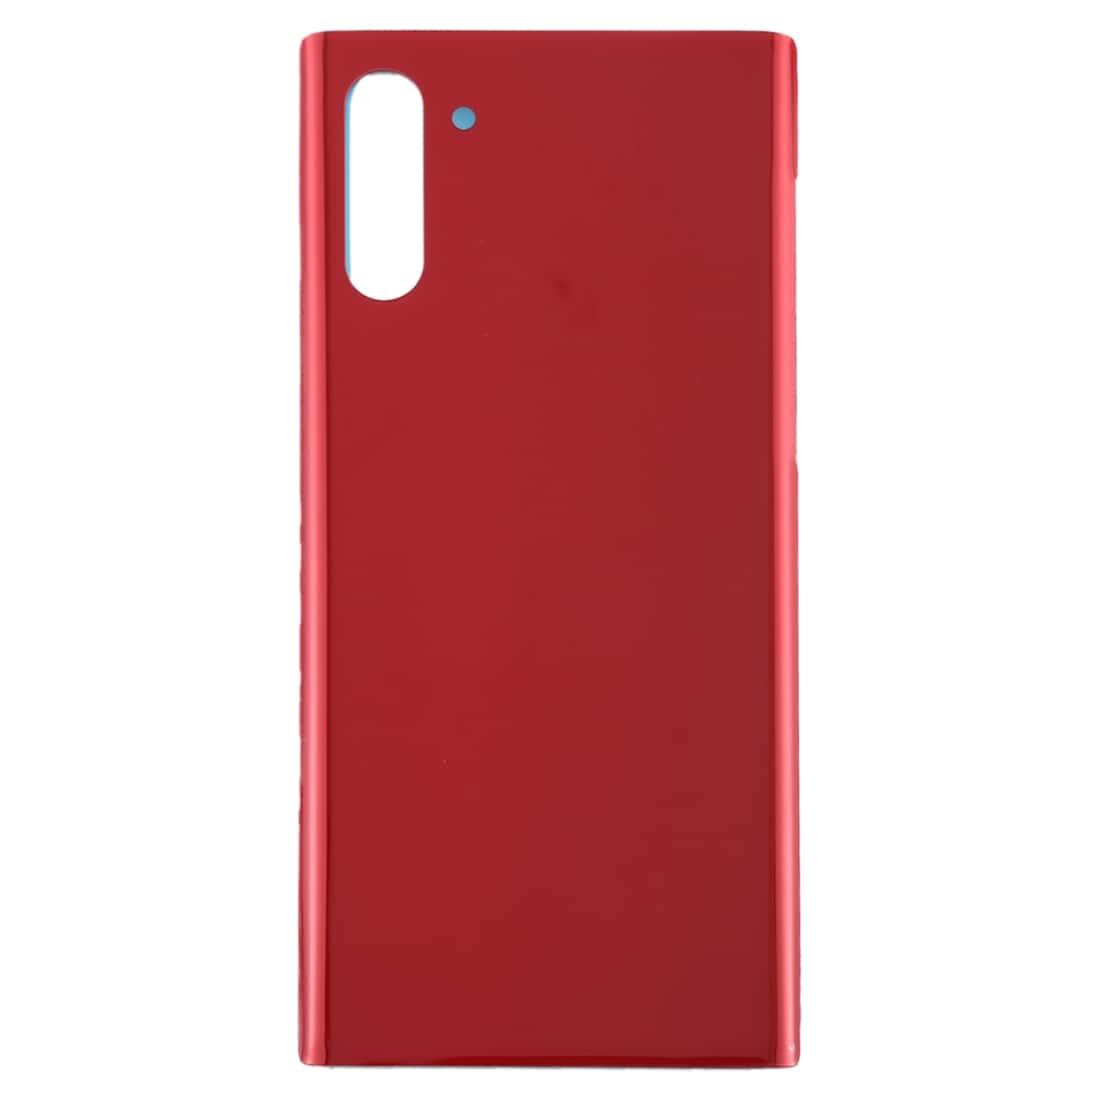 Back Glass Panel for  Samsung Galaxy Note 10 Red